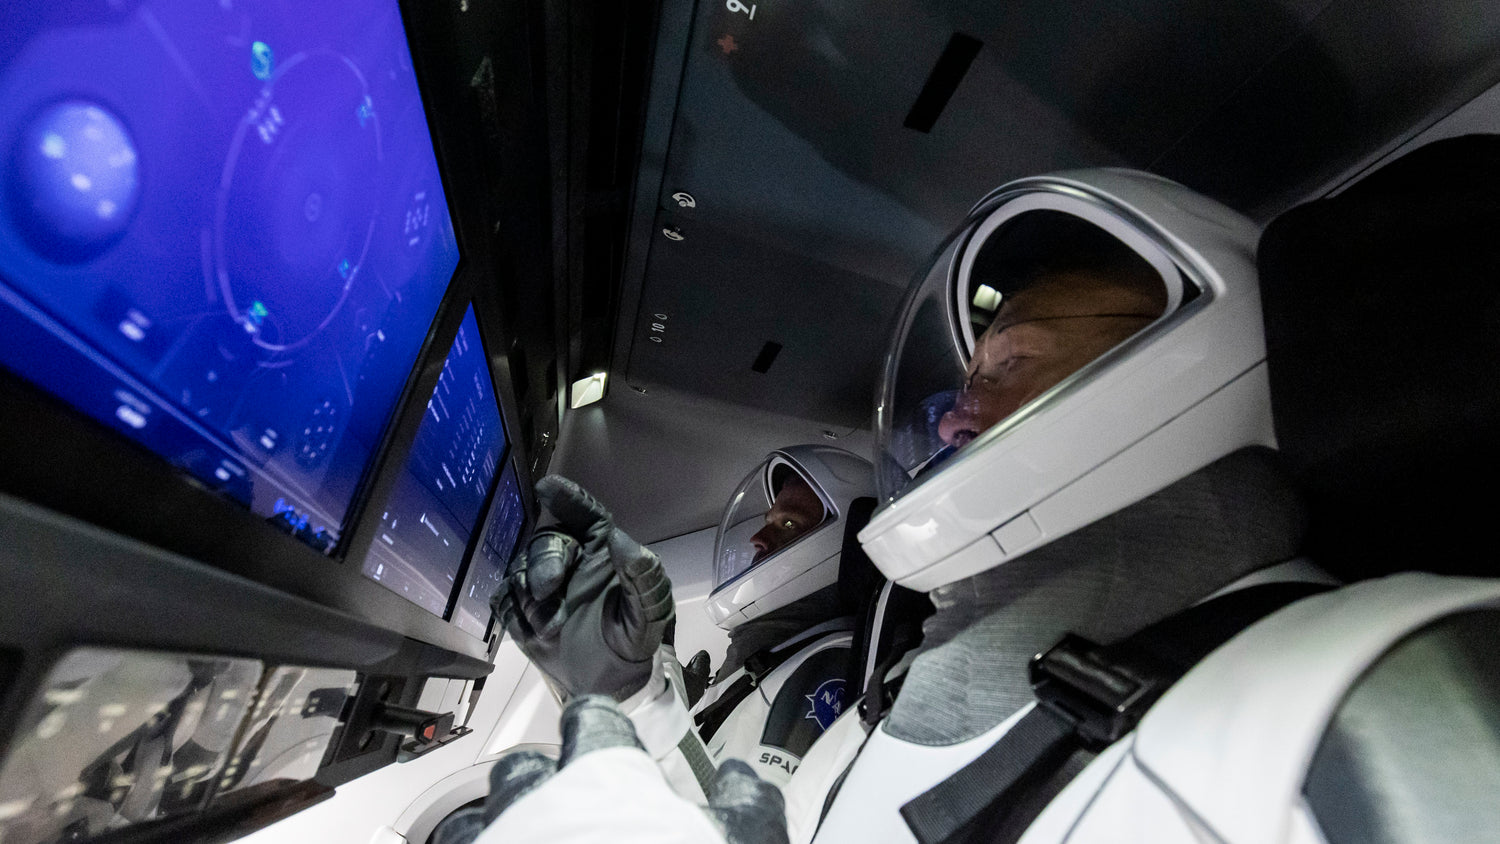 Take a tour inside the SpaceX Crew Dragon spacecraft NASA Astronauts will ride!  [video]